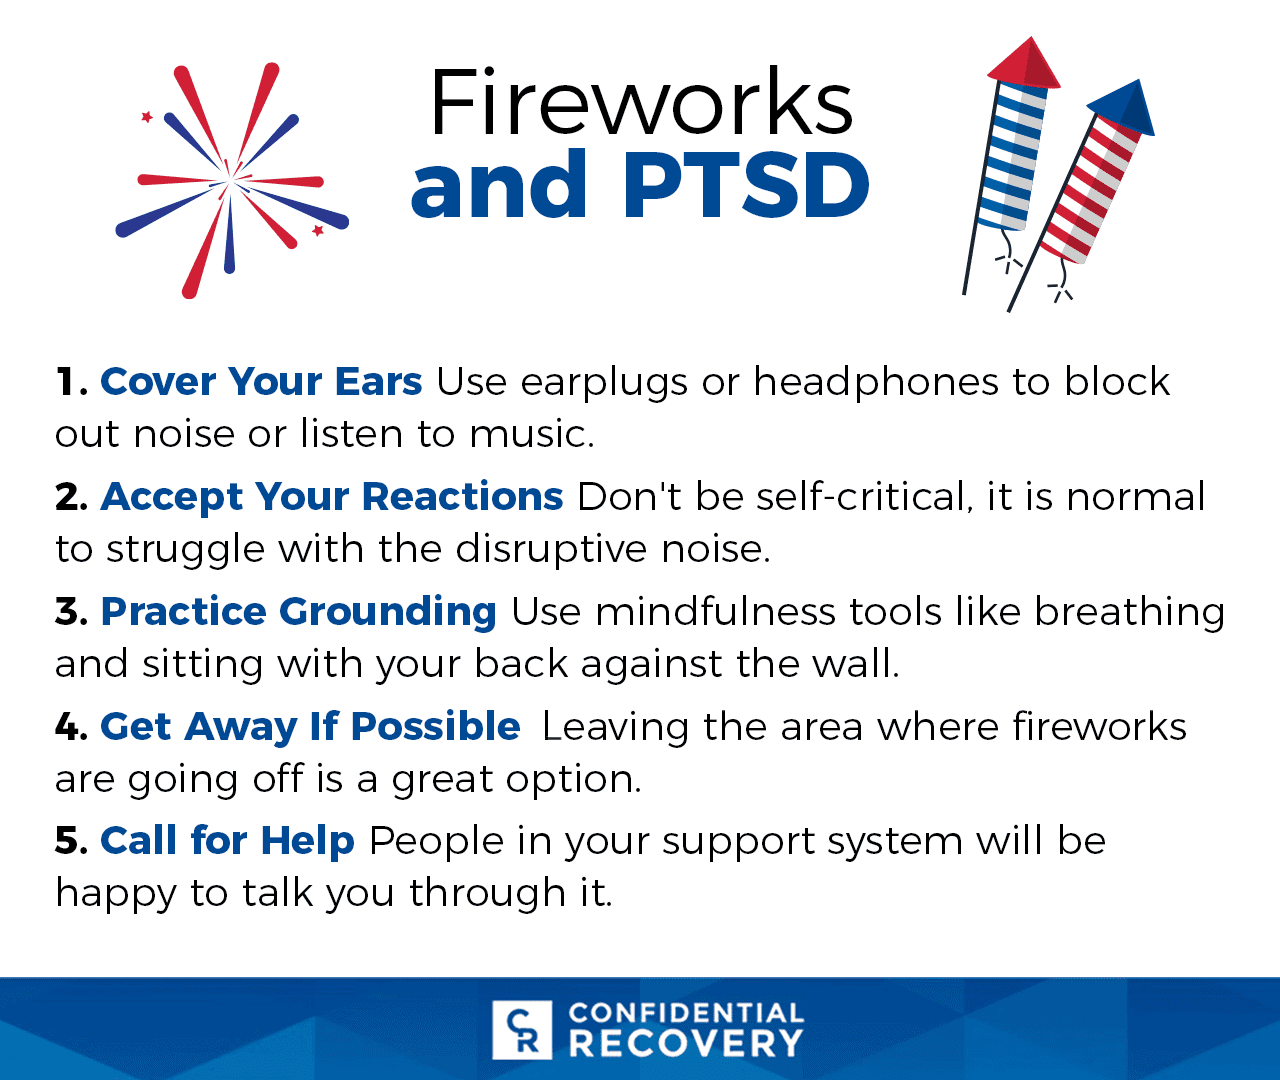 Tips for Coping with Fireworks When You Have PTSD